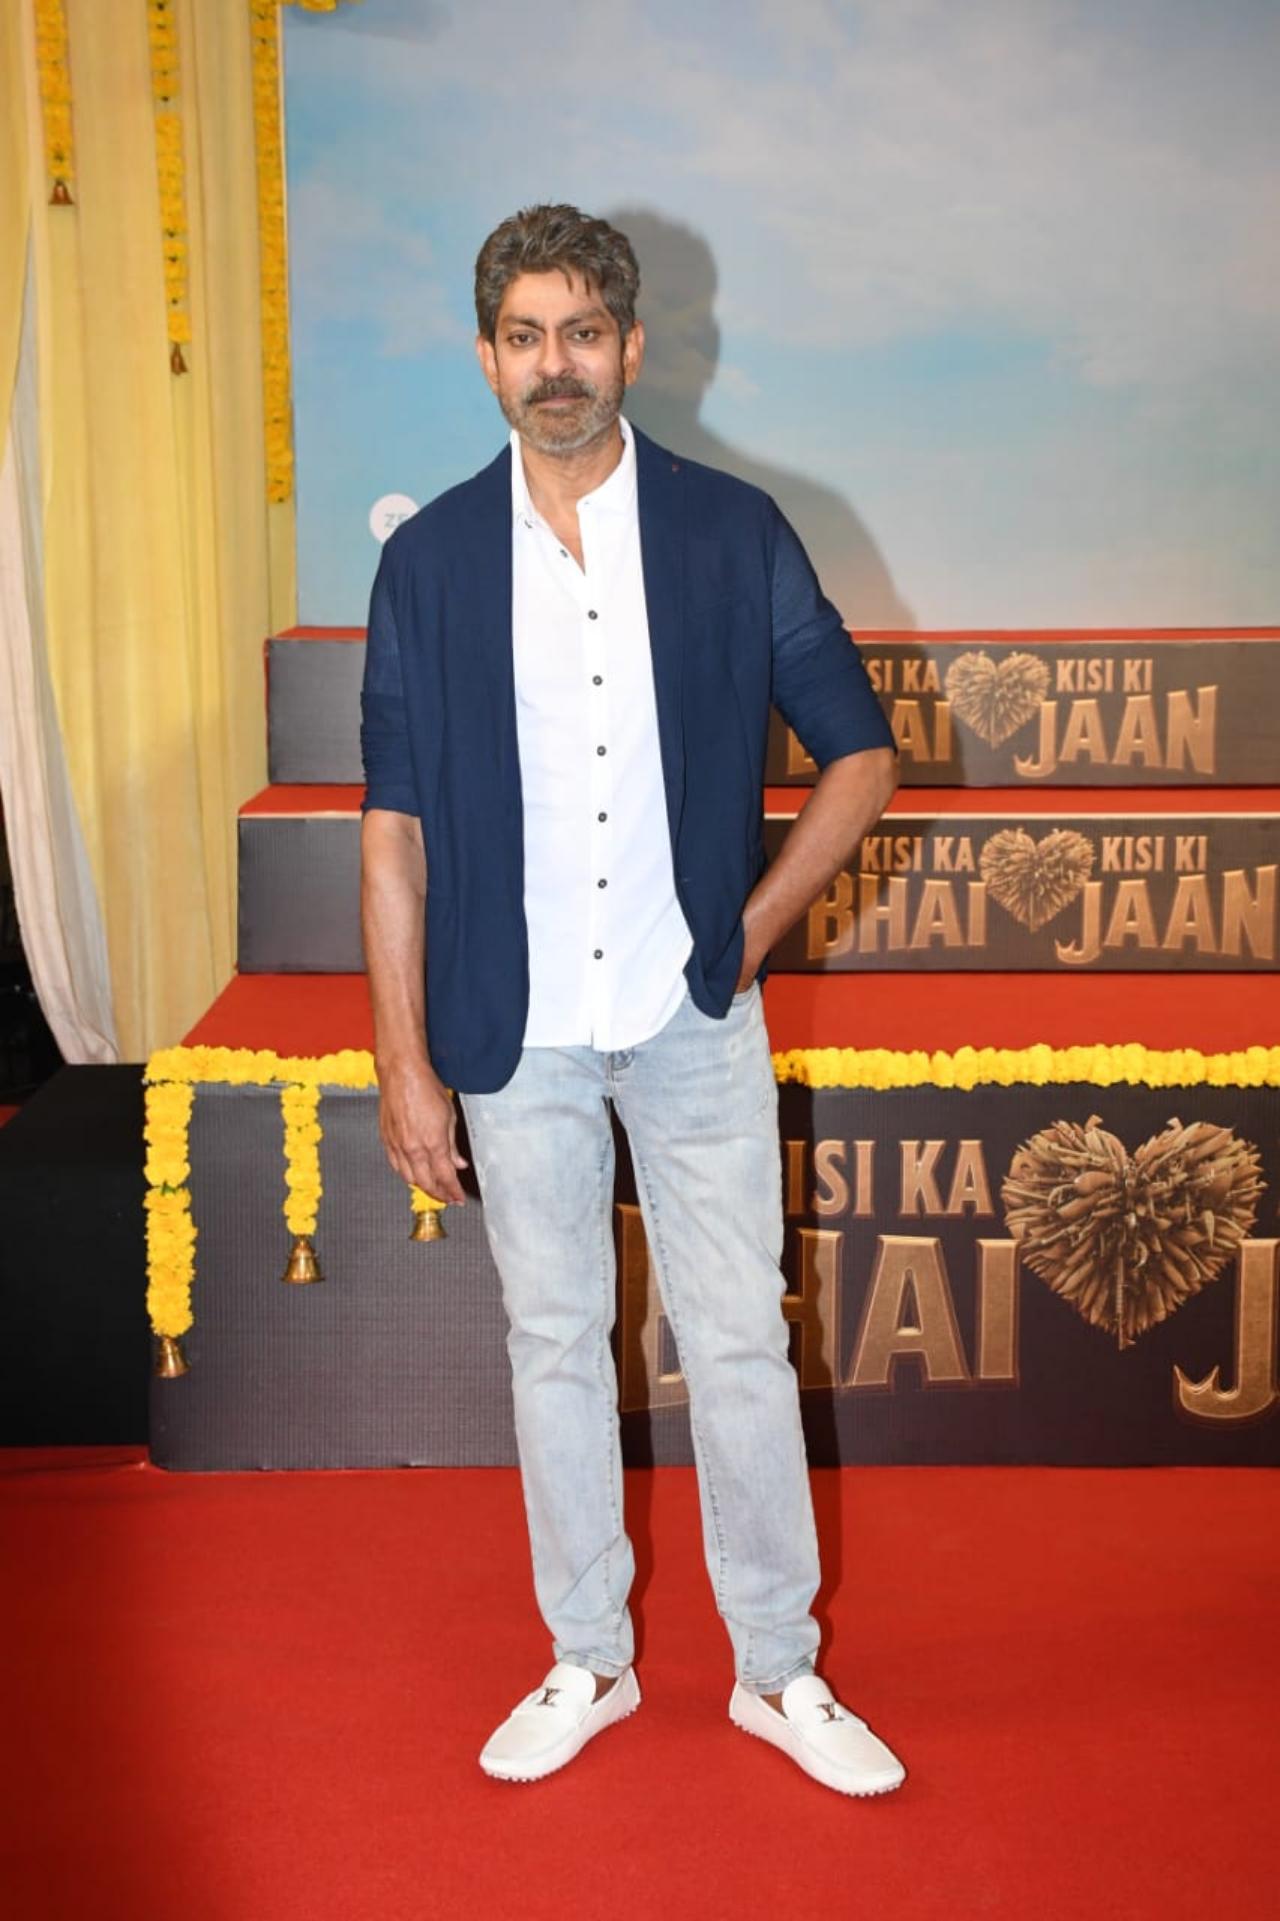 Actor Jagapathi Babu, who has worked in numerous south films, will be seen playing an antagonist in the movie.